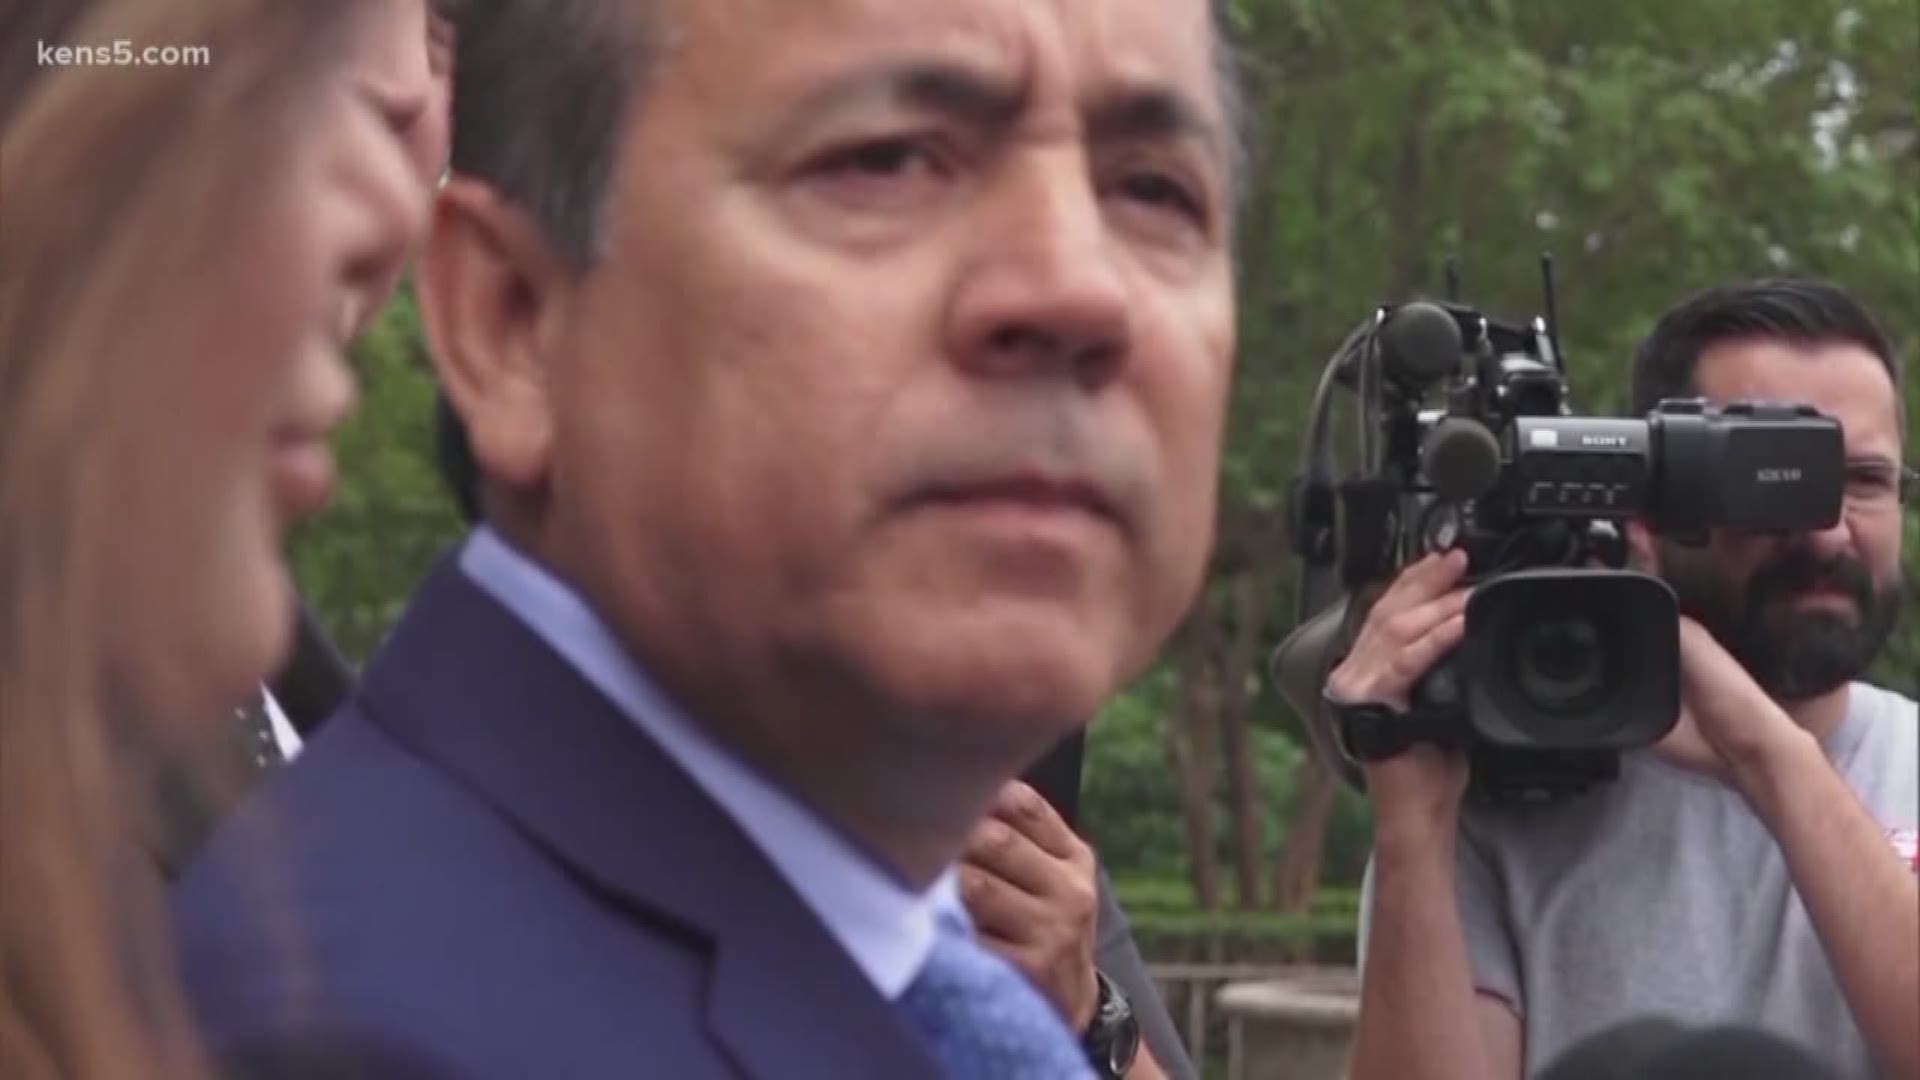 State Senator Carlos Uresti has a lot of options to consider after being found guilty of all fraud charges in federal court.